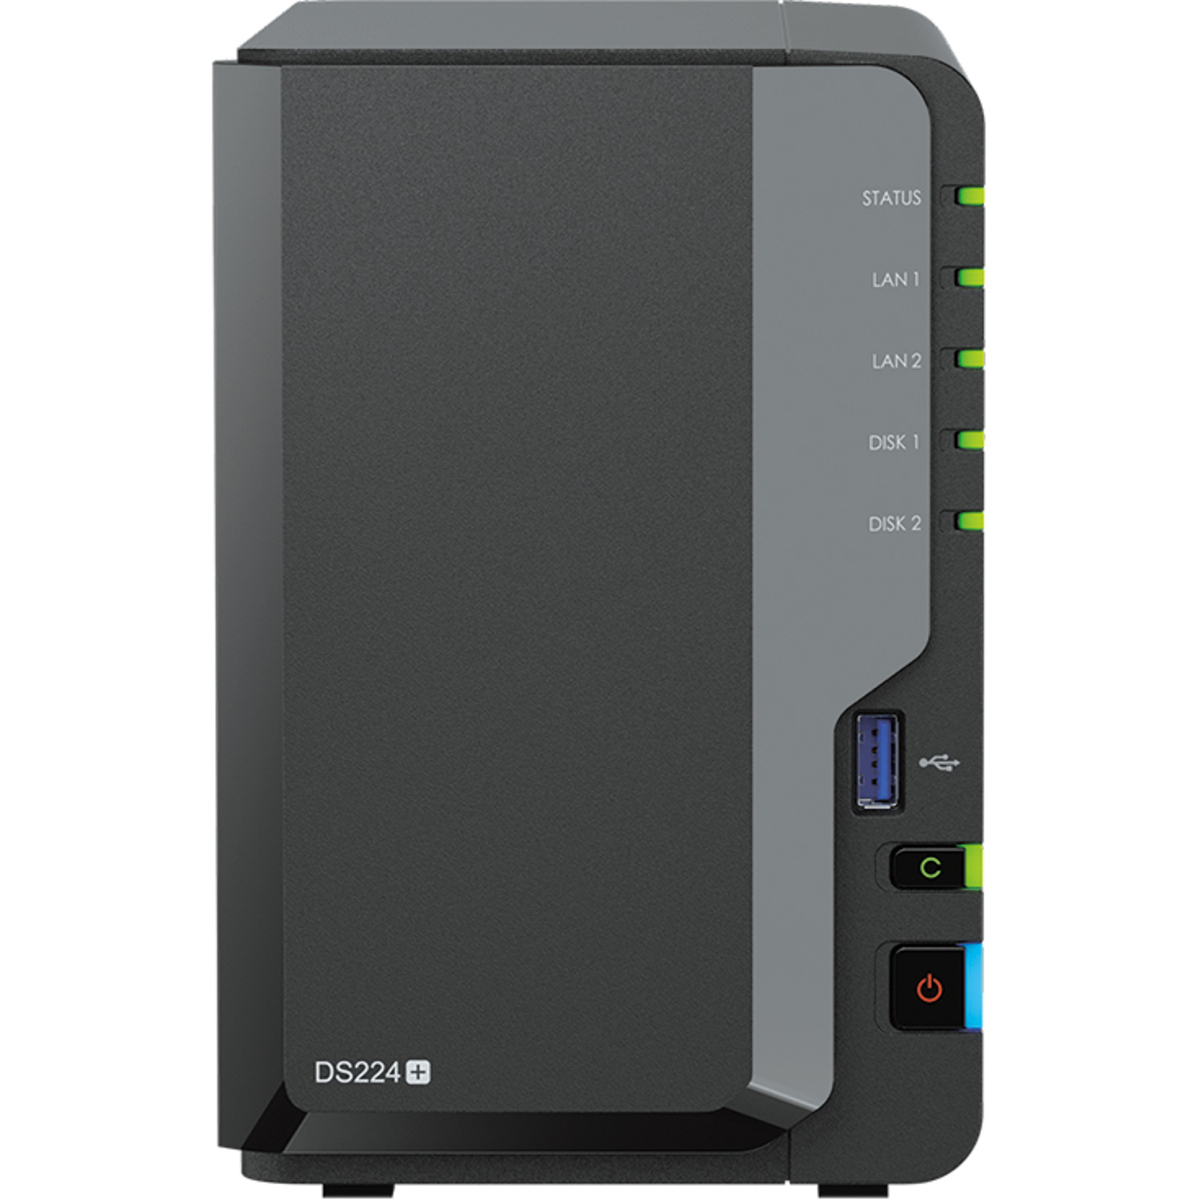 Synology DiskStation DS224+ 10tb 2-Bay Desktop Personal / Basic Home / Small Office NAS - Network Attached Storage Device 1x10tb Seagate IronWolf Pro ST10000NT001 3.5 7200rpm SATA 6Gb/s HDD NAS Class Drives Installed - Burn-In Tested - ON SALE - FREE RAM UPGRADE DiskStation DS224+